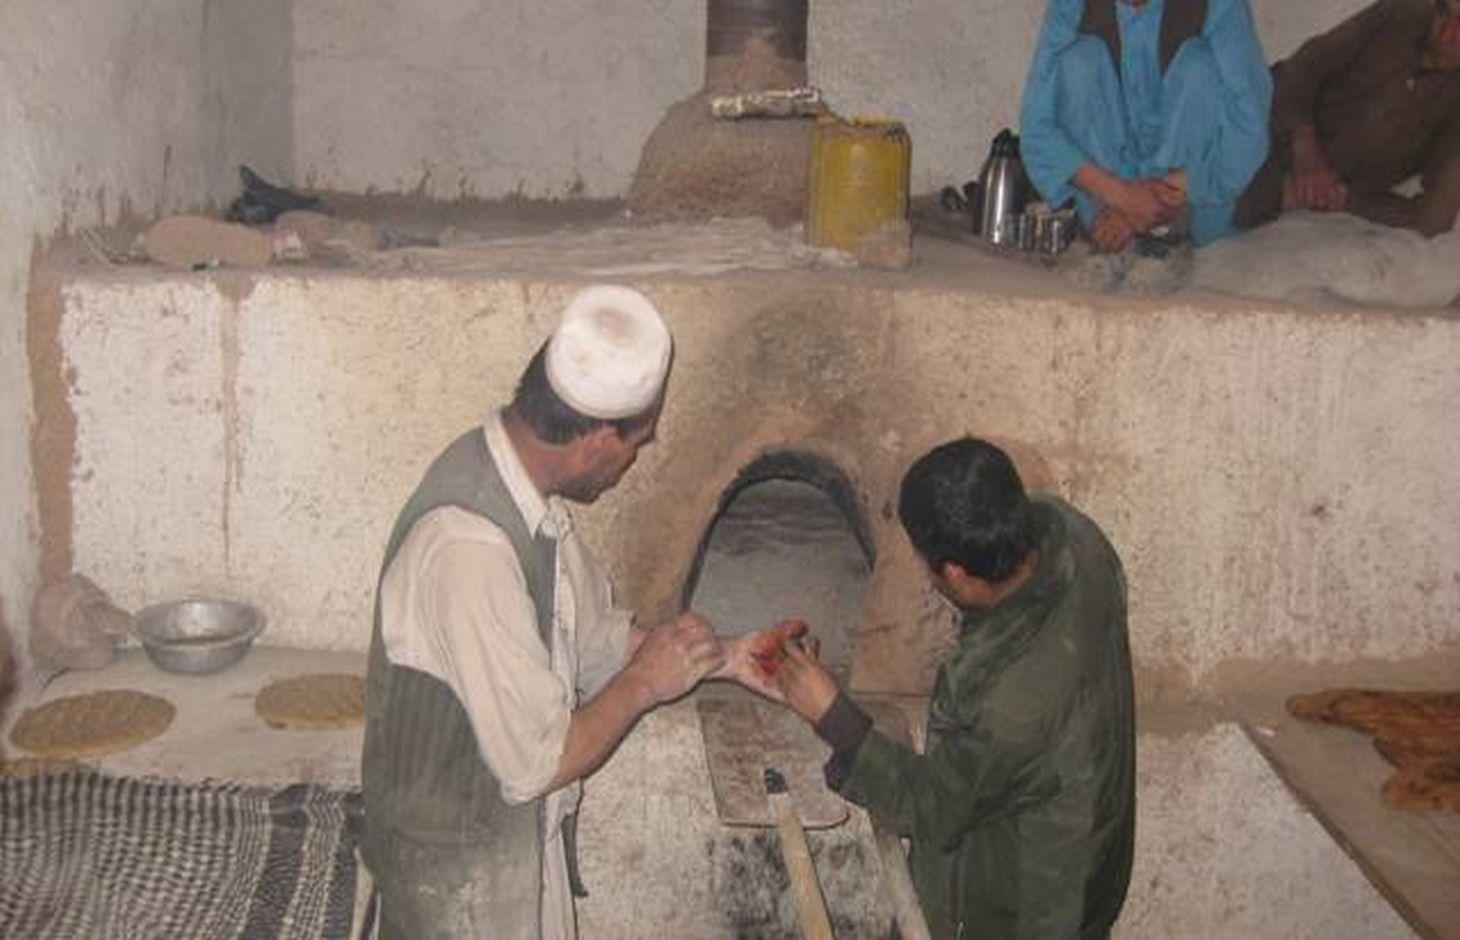 An overview of a community bakery from inside. The bakeries and his assistant are showing the Dash/oven using a torch.